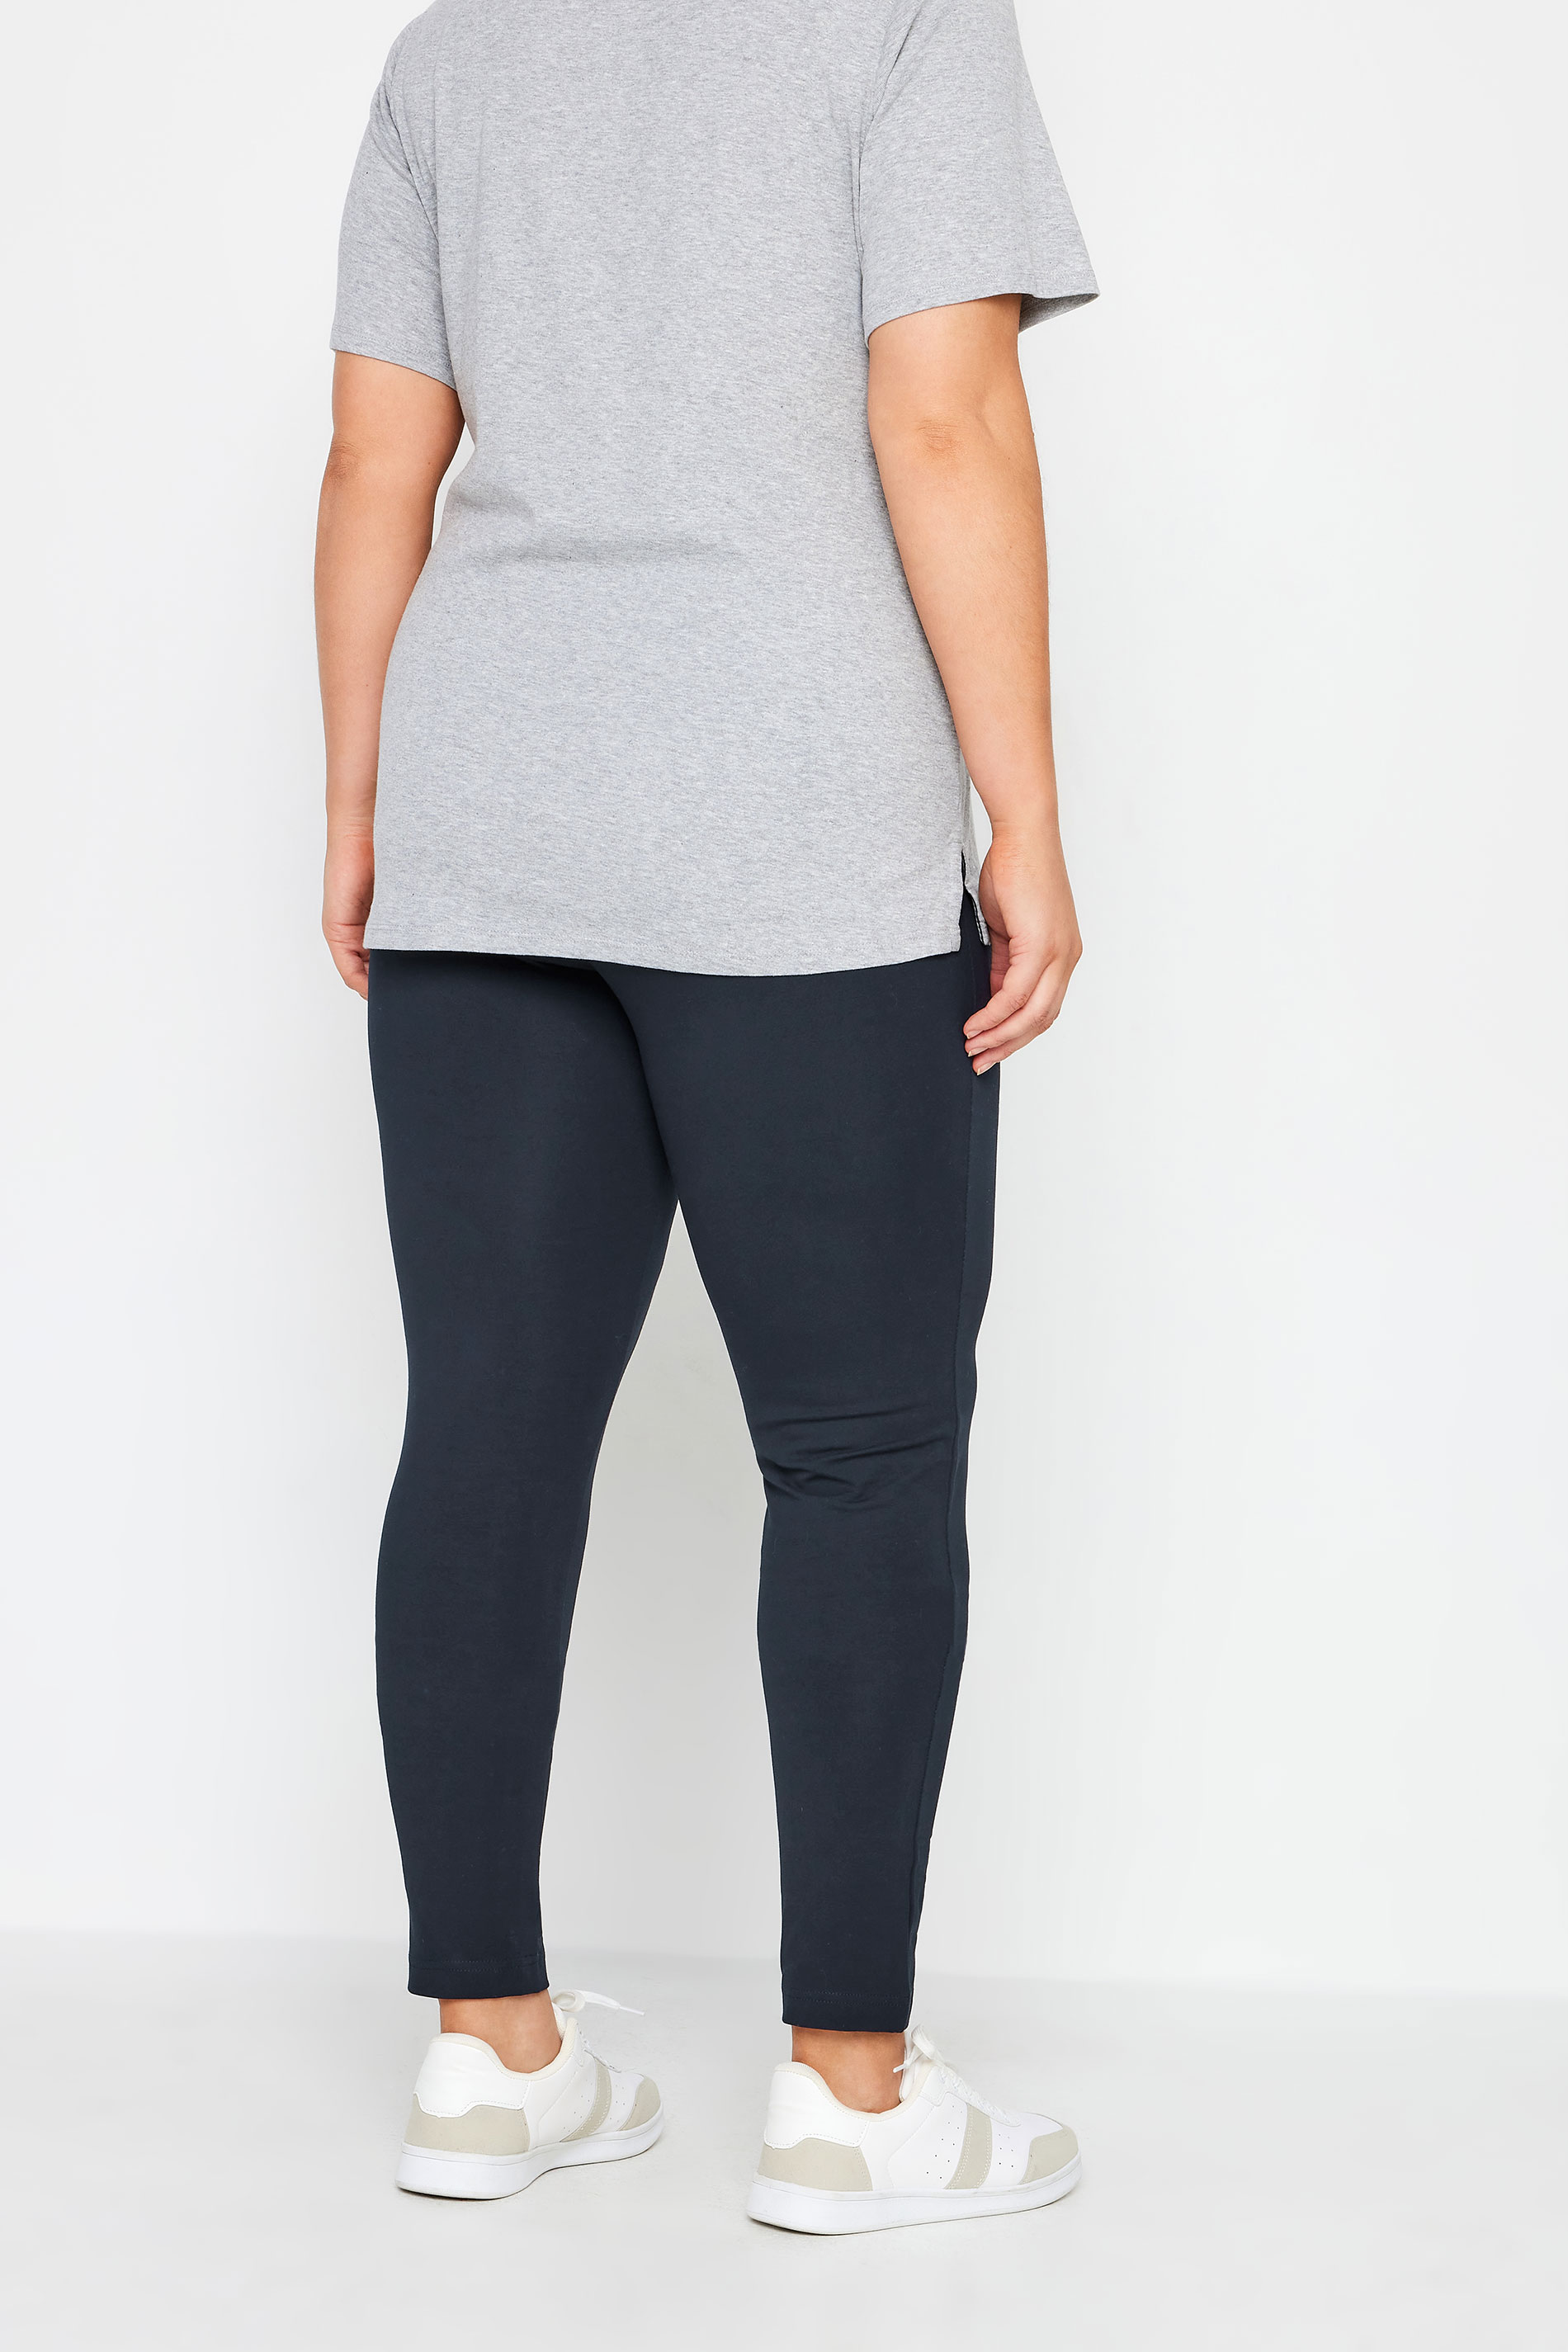 City Chic Navy Blue Tall Active Leggings 3